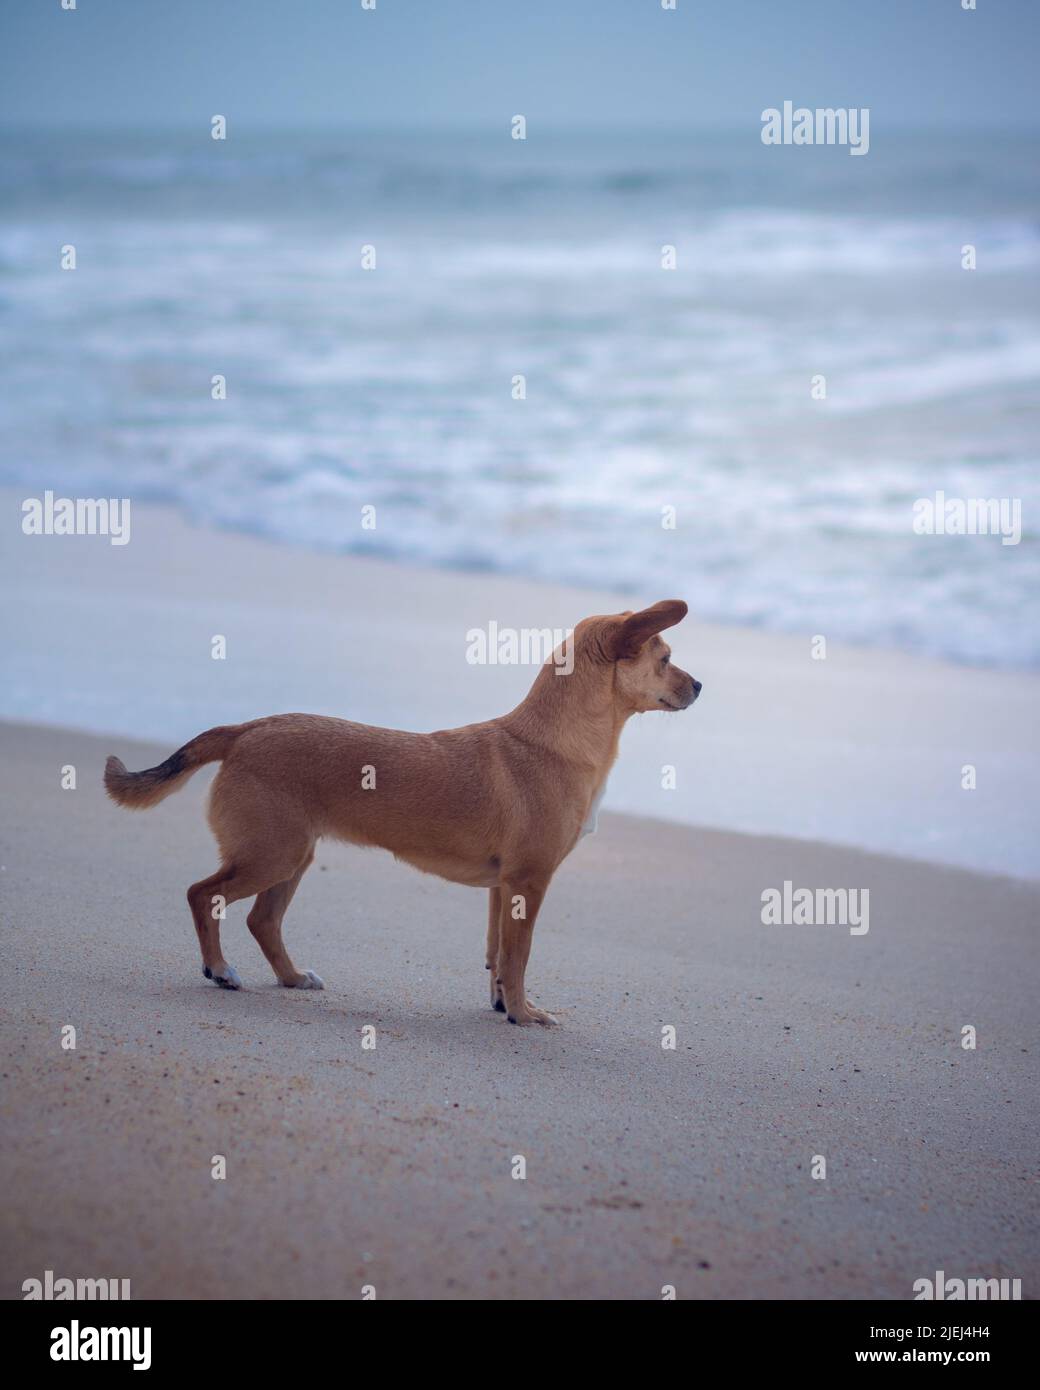 A small mixed-breed dog standing alone in front of the ocean at the beach and looking ahead on a foggy day in the evening light. Aged photo effect Stock Photo